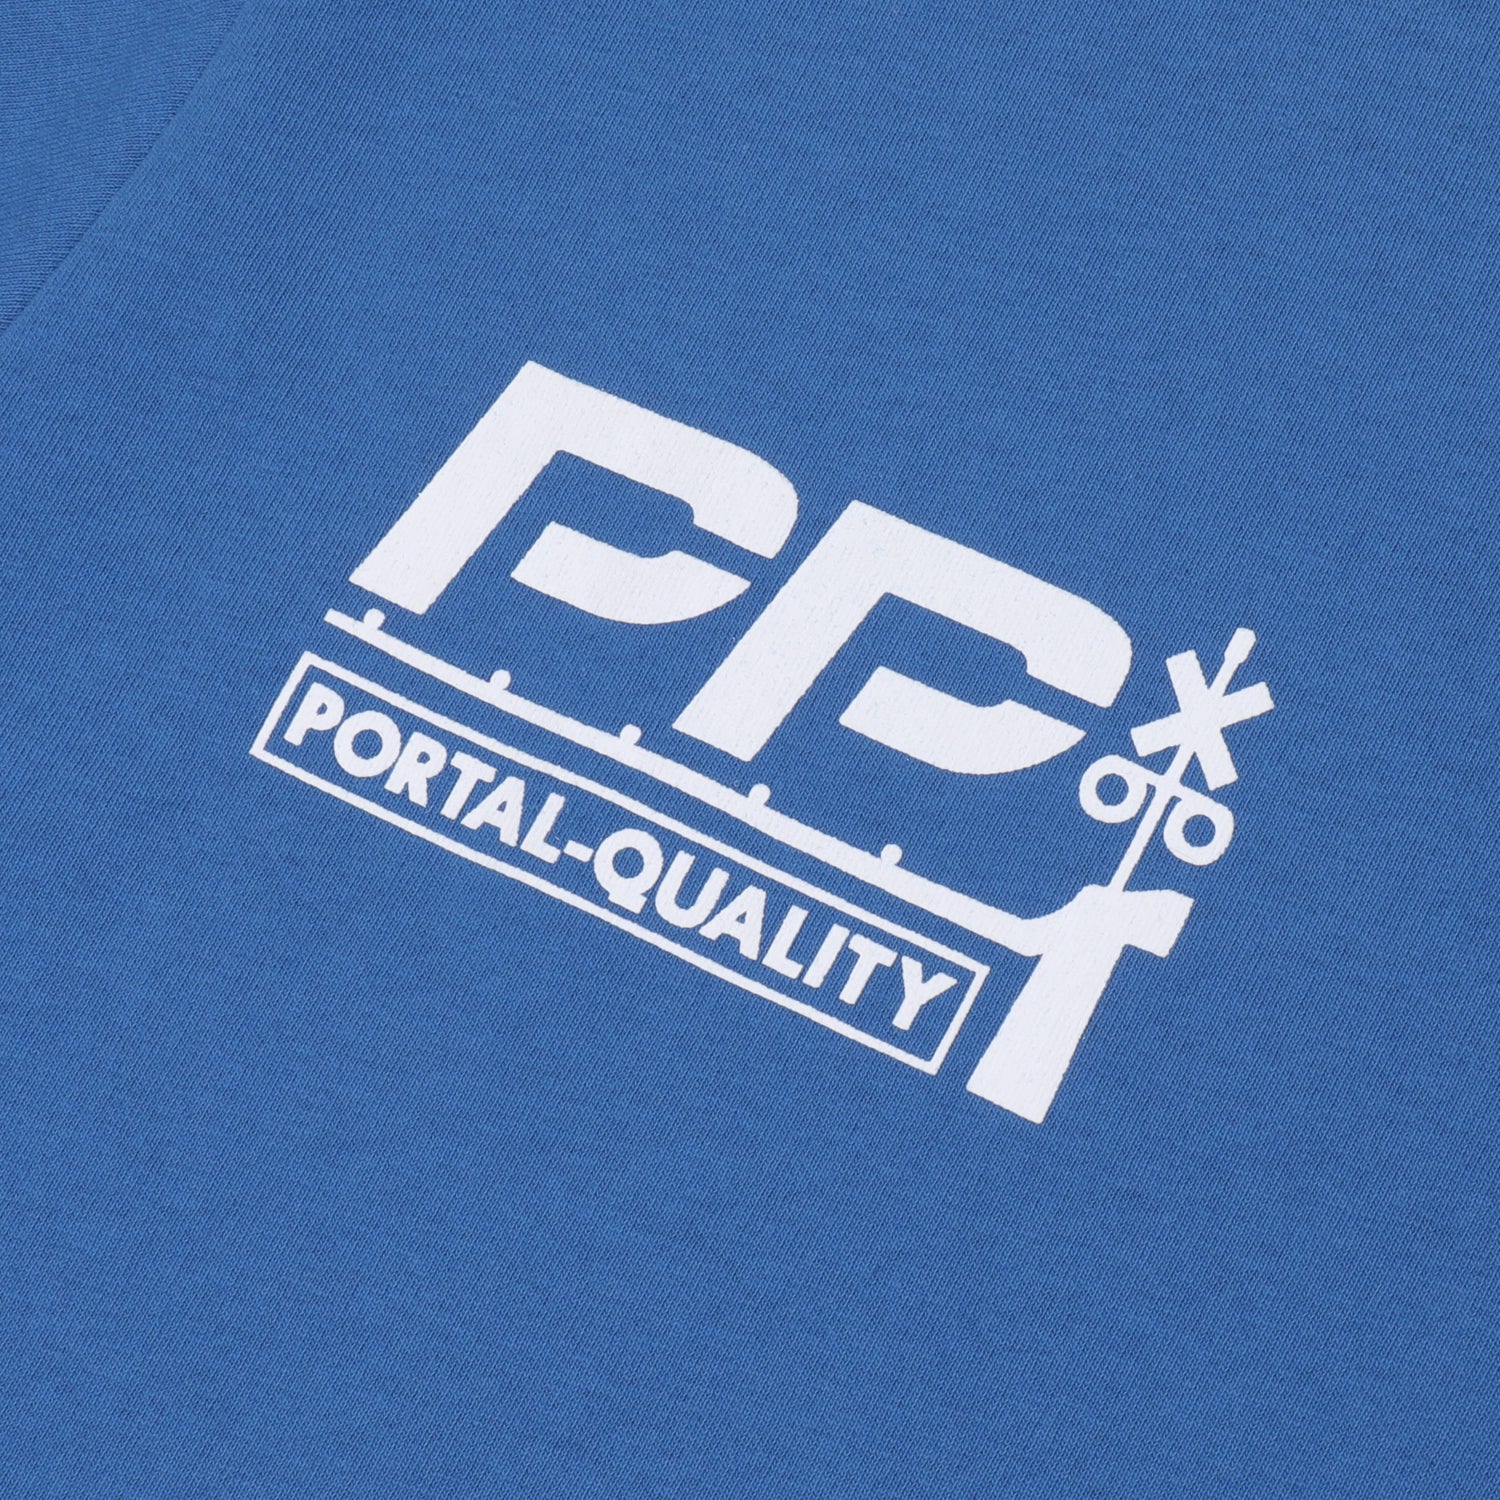 Pass~Port Long Con Pocket Tee - Washed Royal Blue